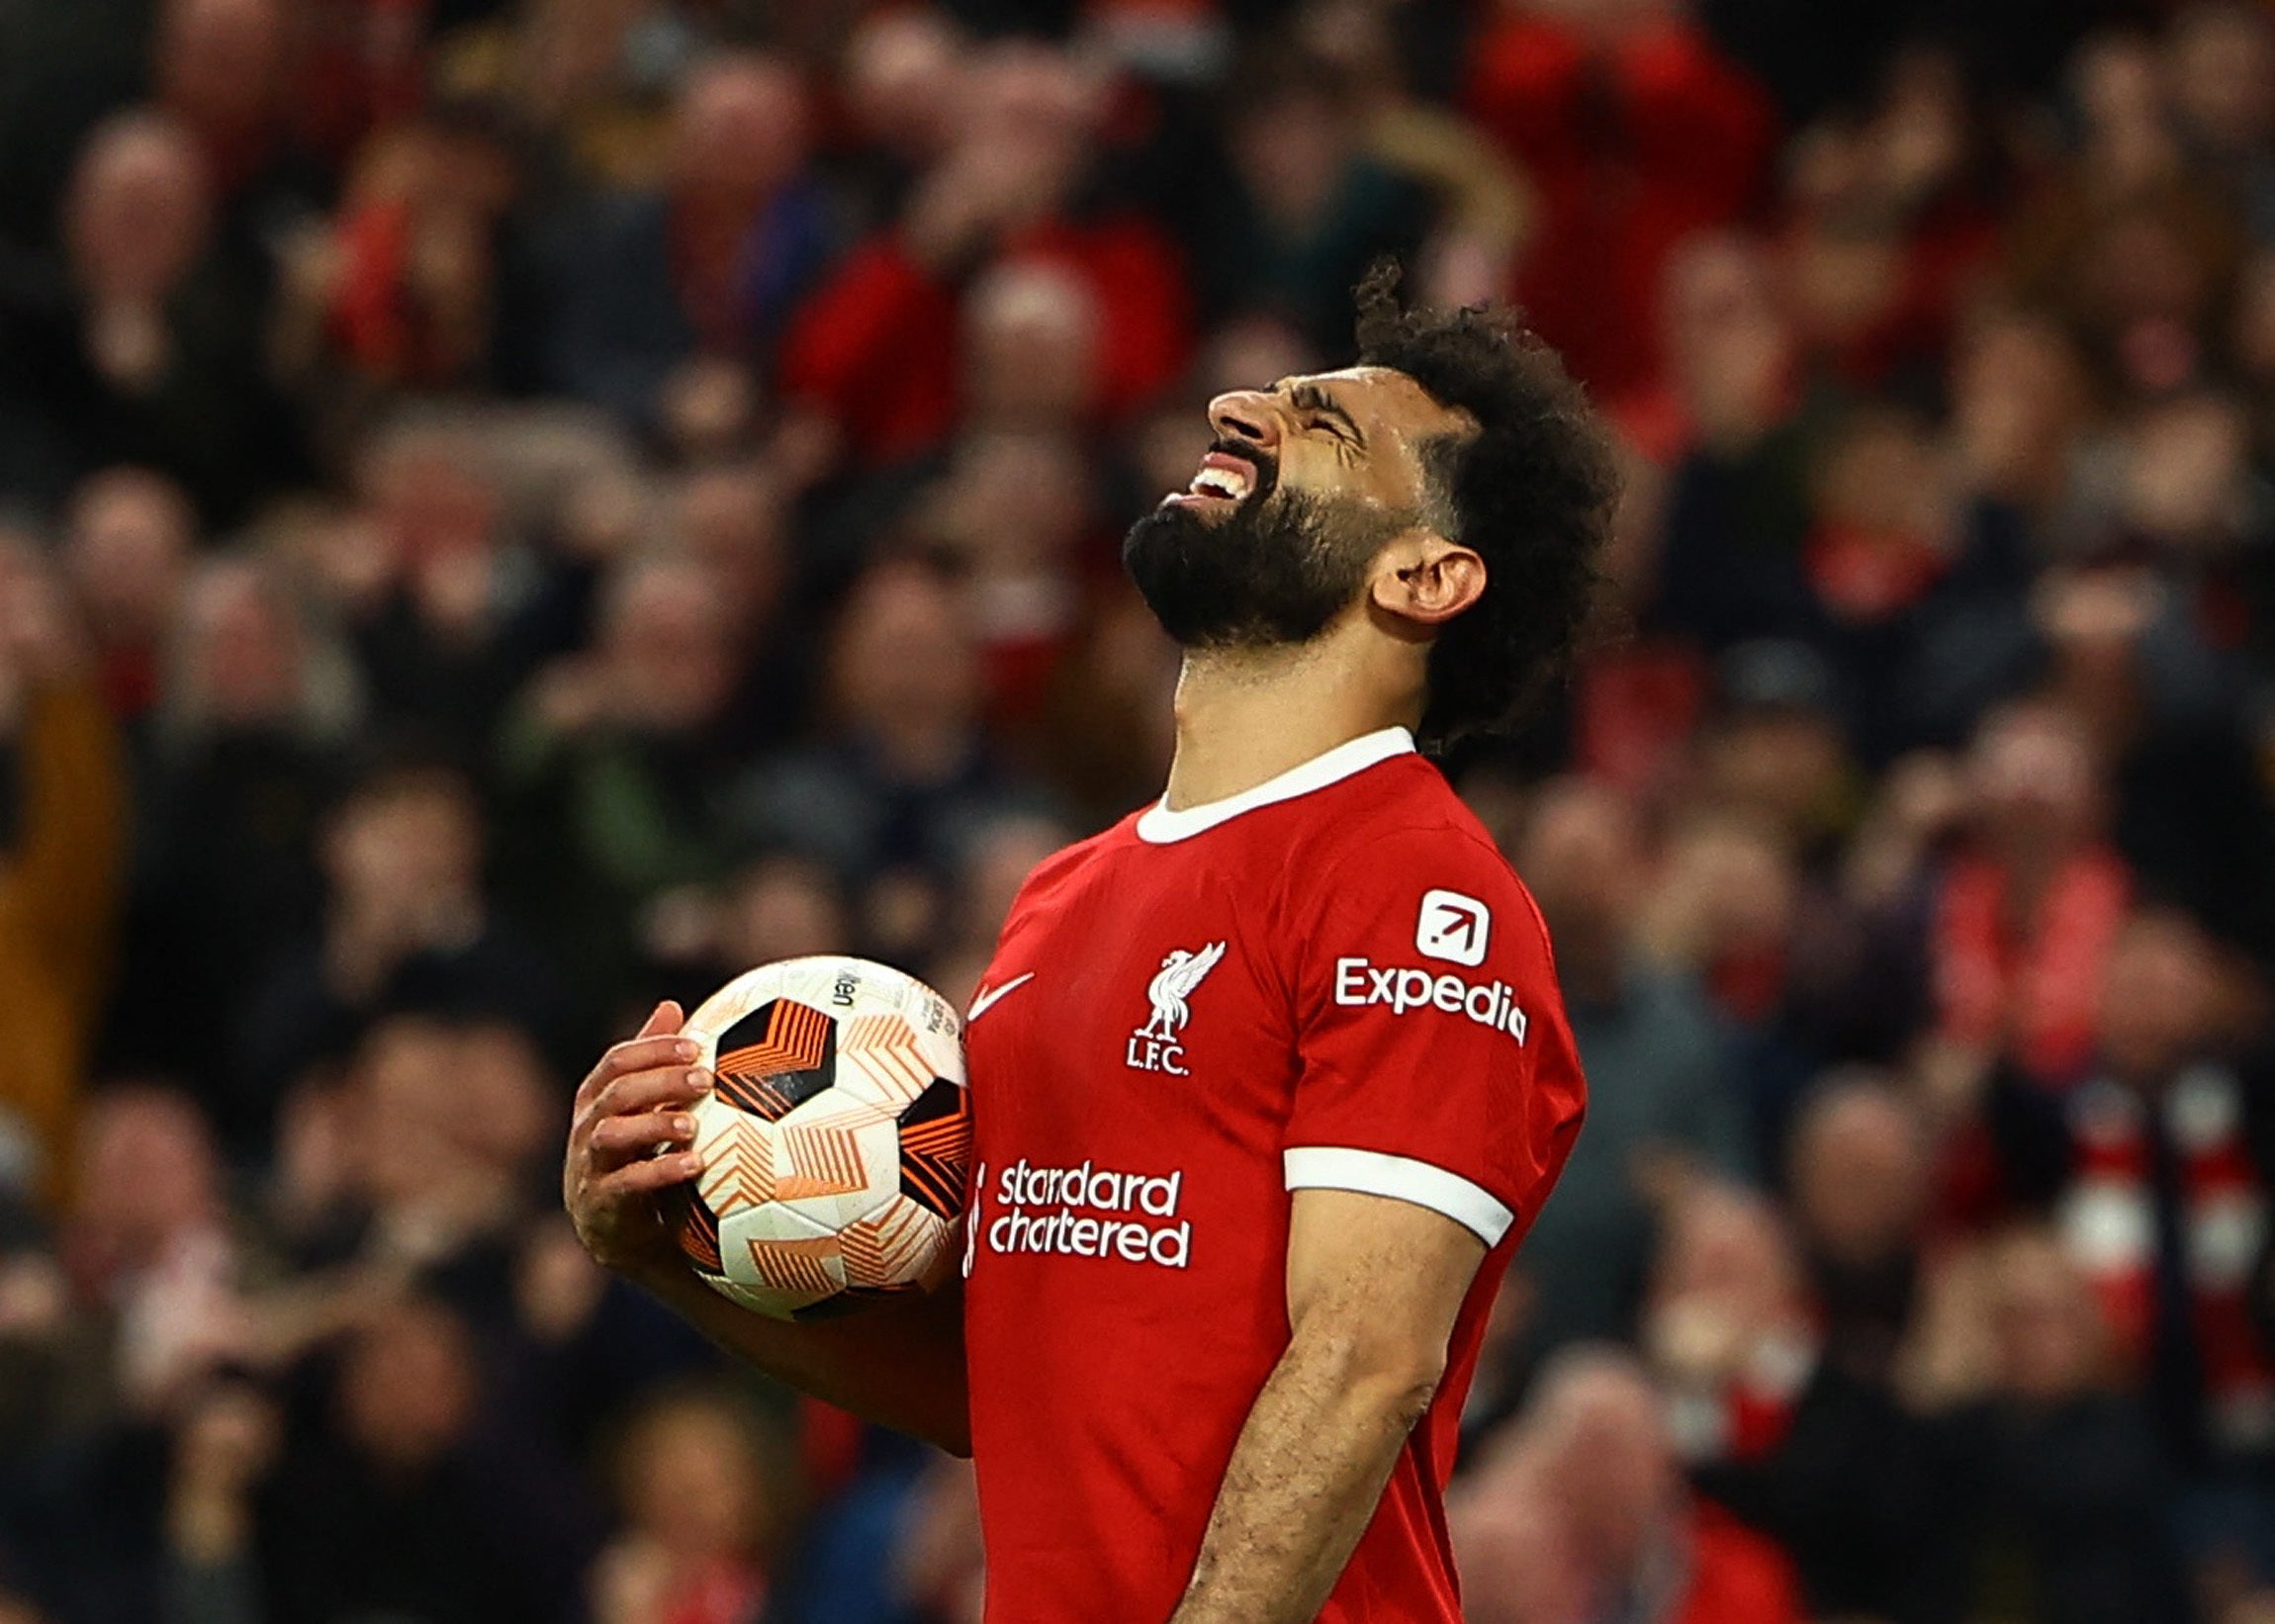 Mohamed Salah has been off-form for the Reds